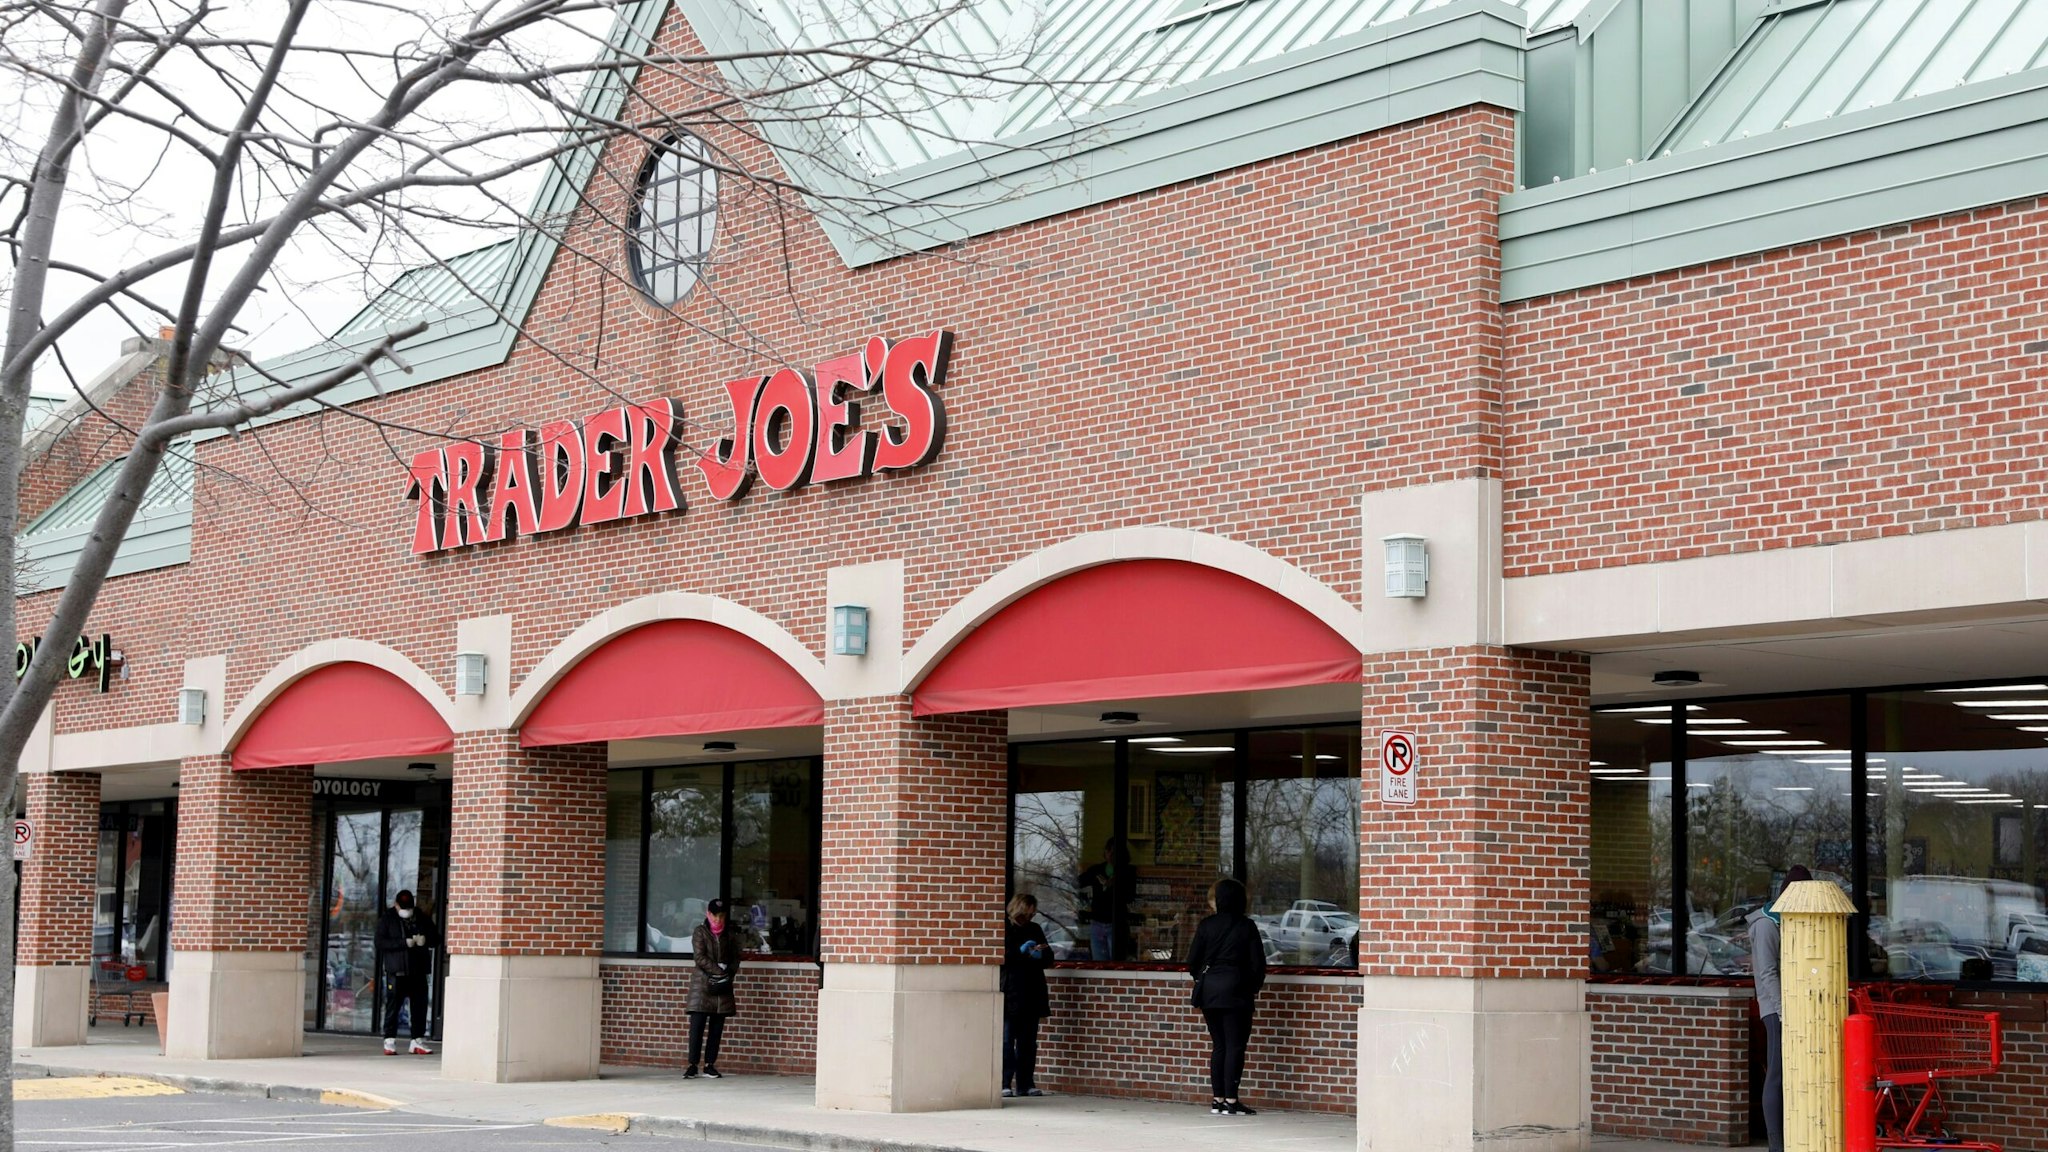 People social distance as they wait to get into the Trader Joe's store to avoid the spread of COVID-19 in Bloomfield Hills Michigan on March 30, 2020. - Trader Joe's only lets 20 customers in the store at a time to shop. (Photo by JEFF KOWALSKY / AFP) (Photo by JEFF KOWALSKY/AFP via Getty Images)